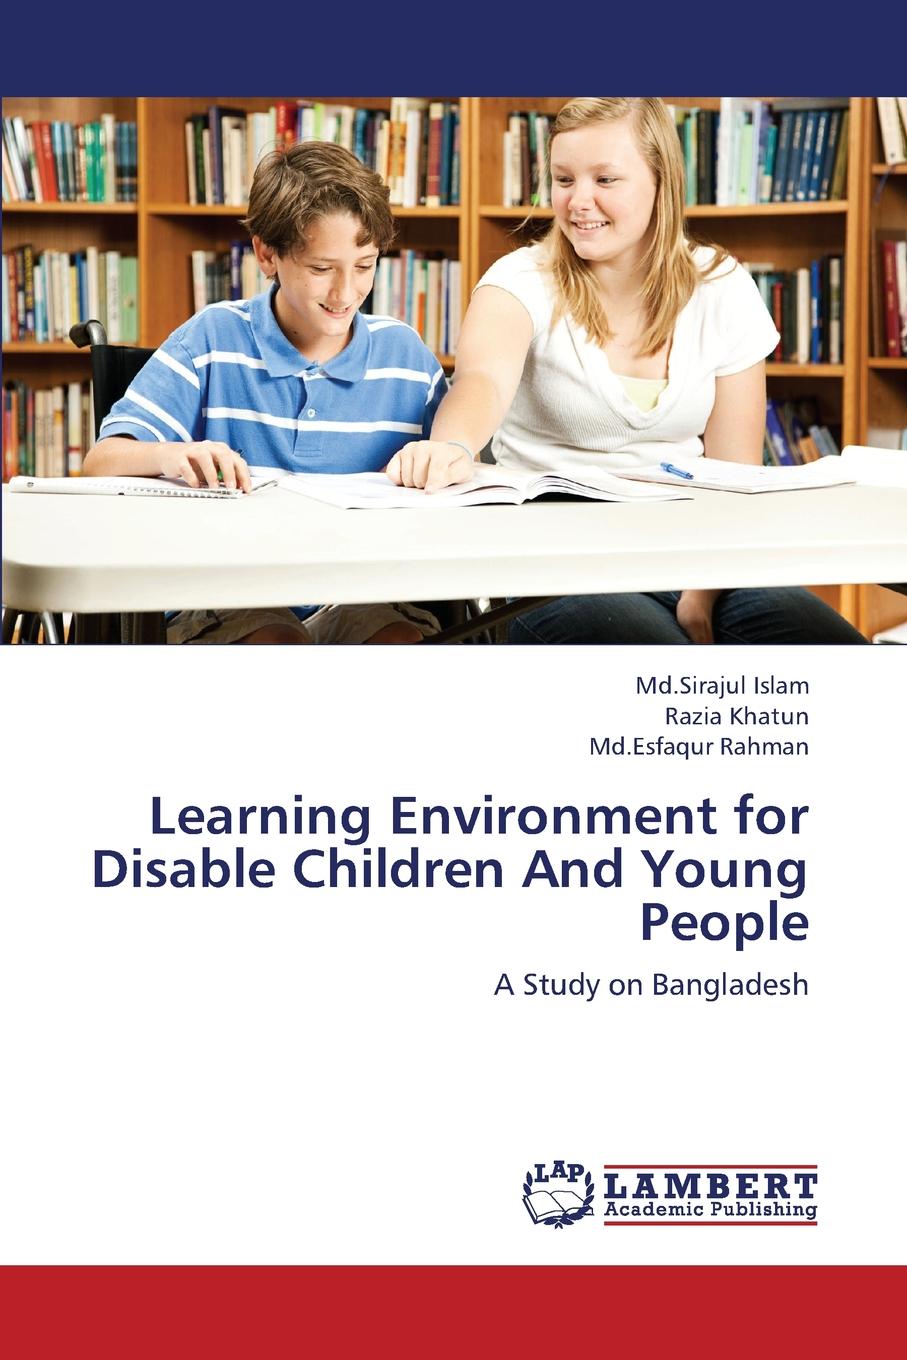 Learning Environment for Disable Children and Young People